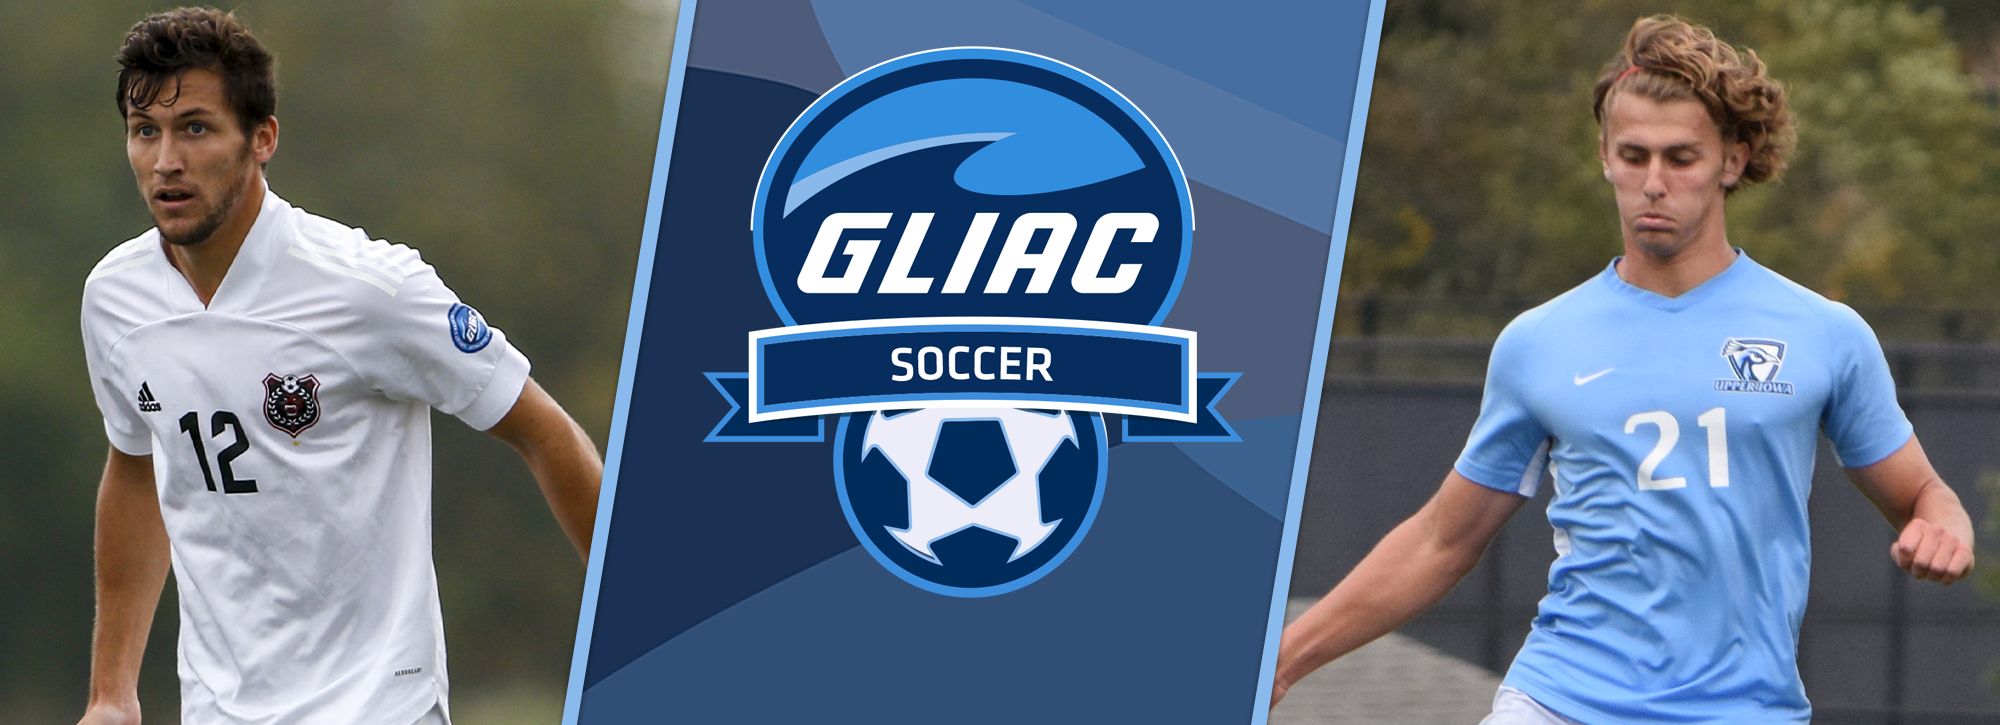 Davenport's Sikkema and Upper Iowa's Drozdowski awarded GLIAC men's soccer player of the week honors